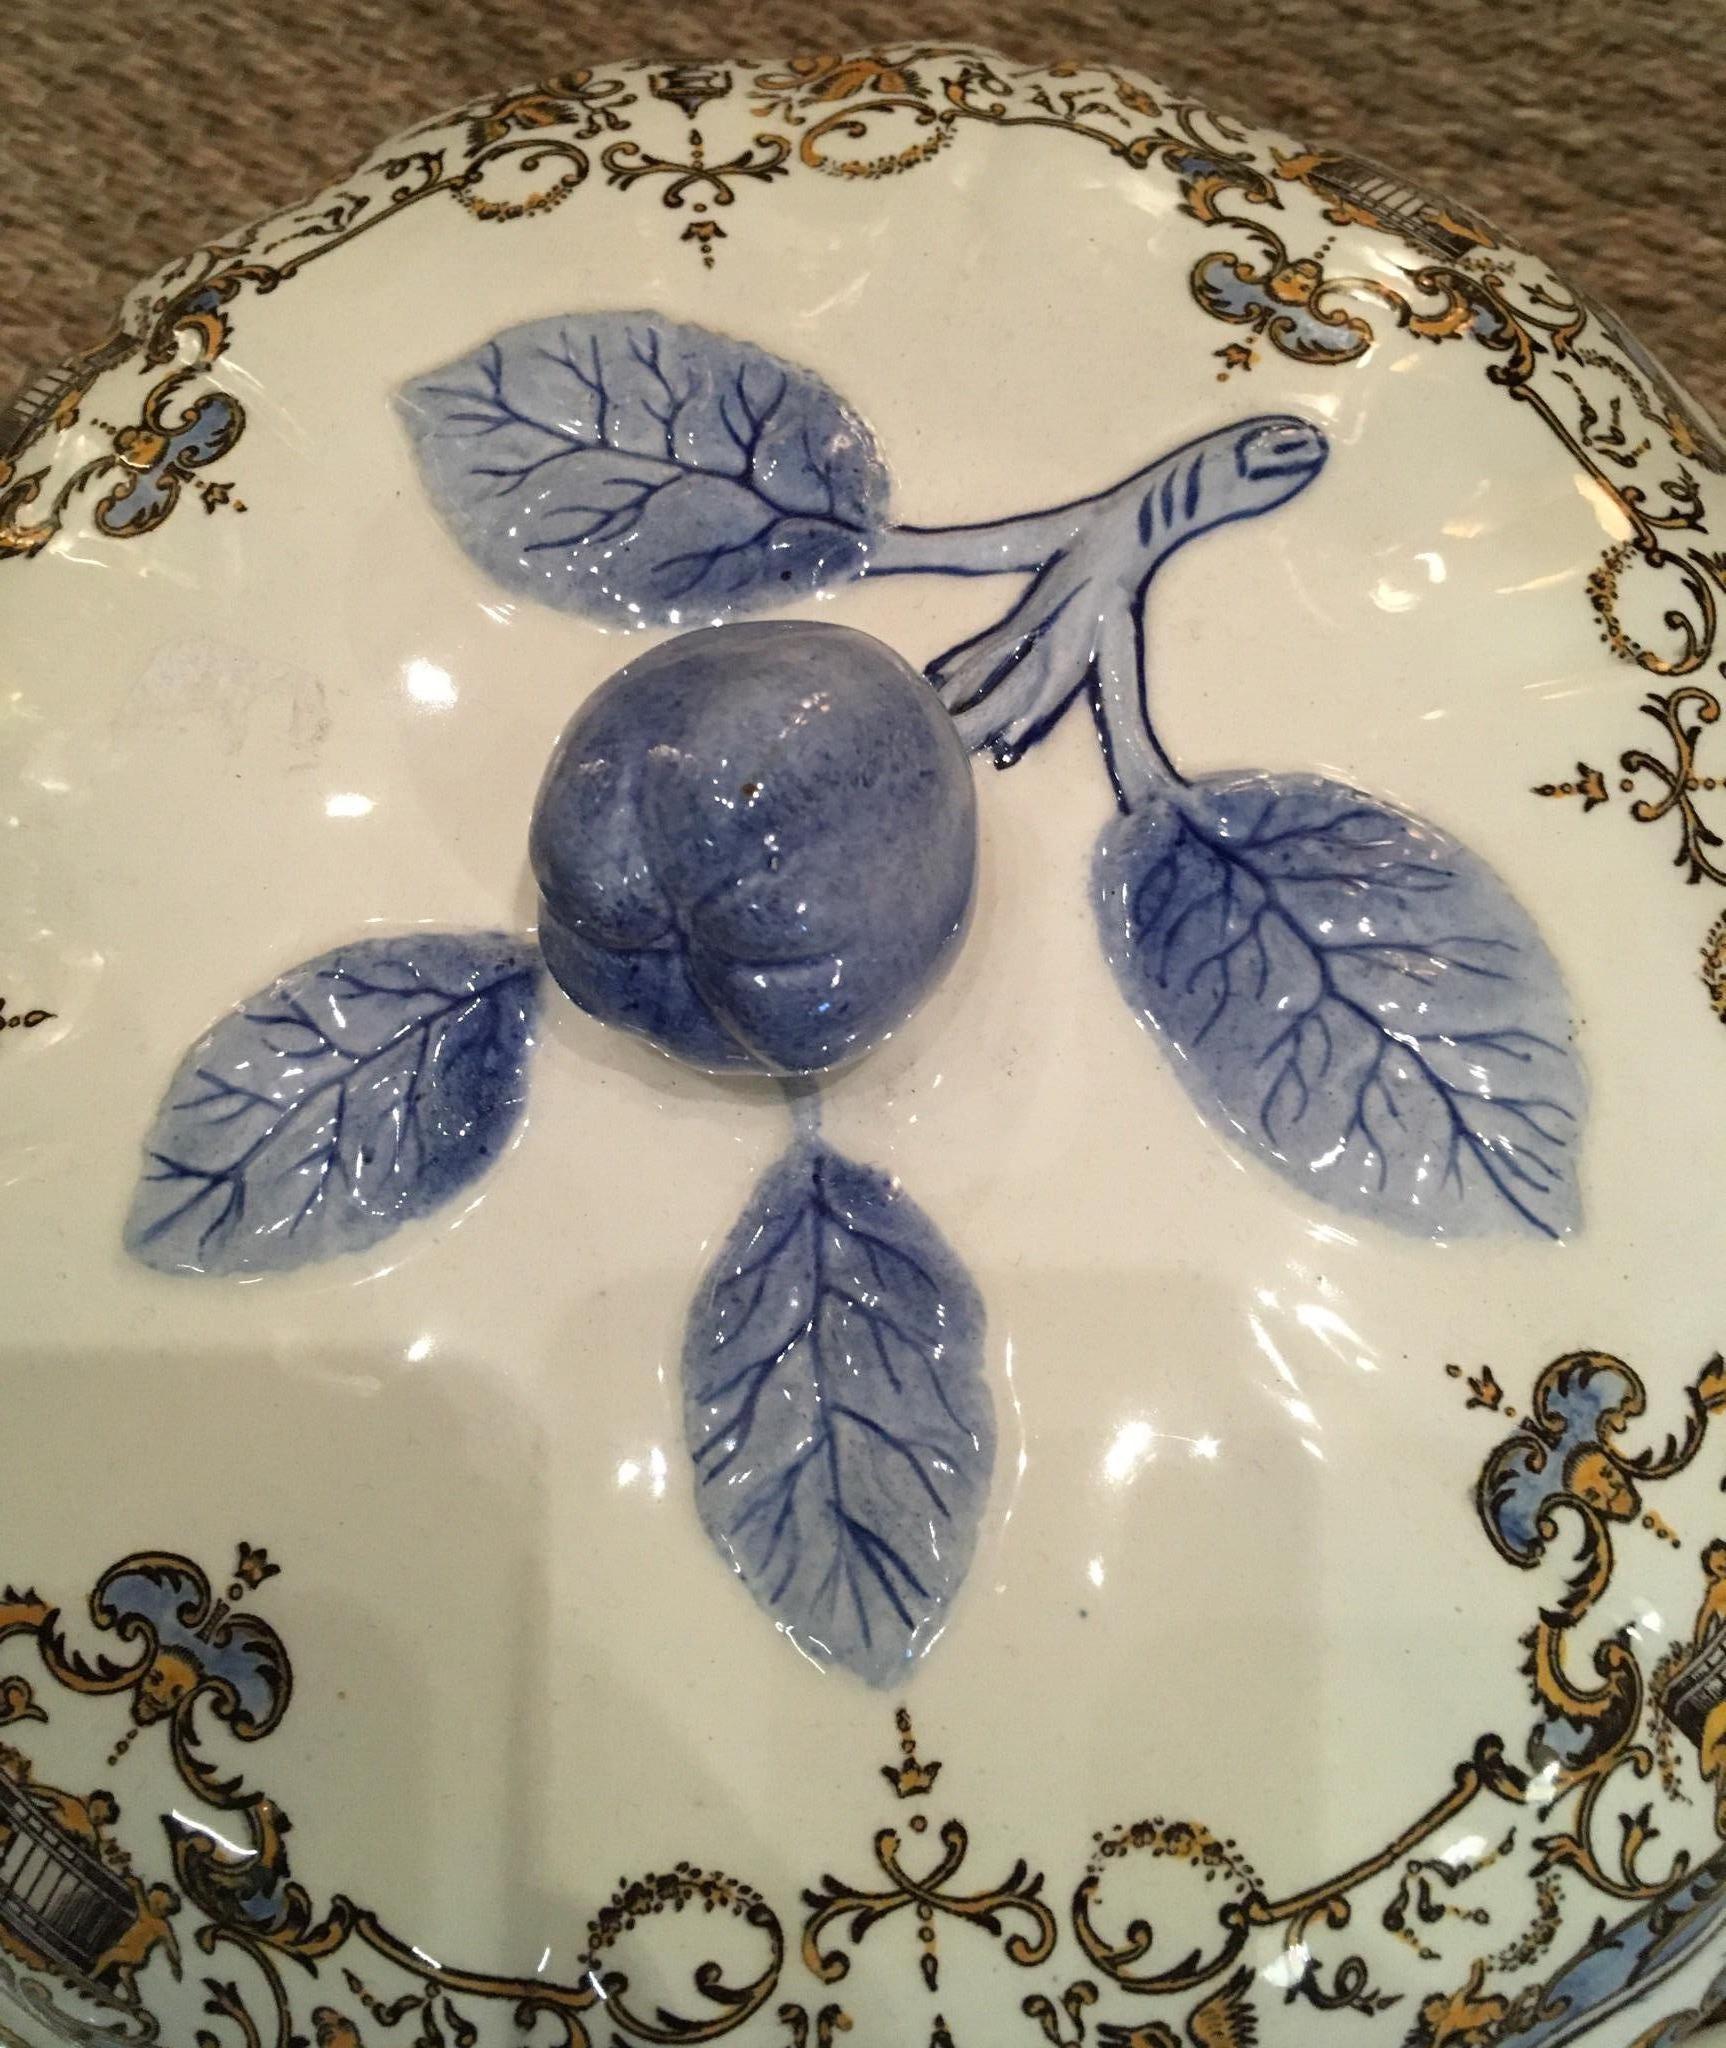 Faïencerie de Gien, circa 1940, France.
Dinner table service.
Faience (or earthenware).

Blue apple model.
Around 60 pieces.
In good condition.